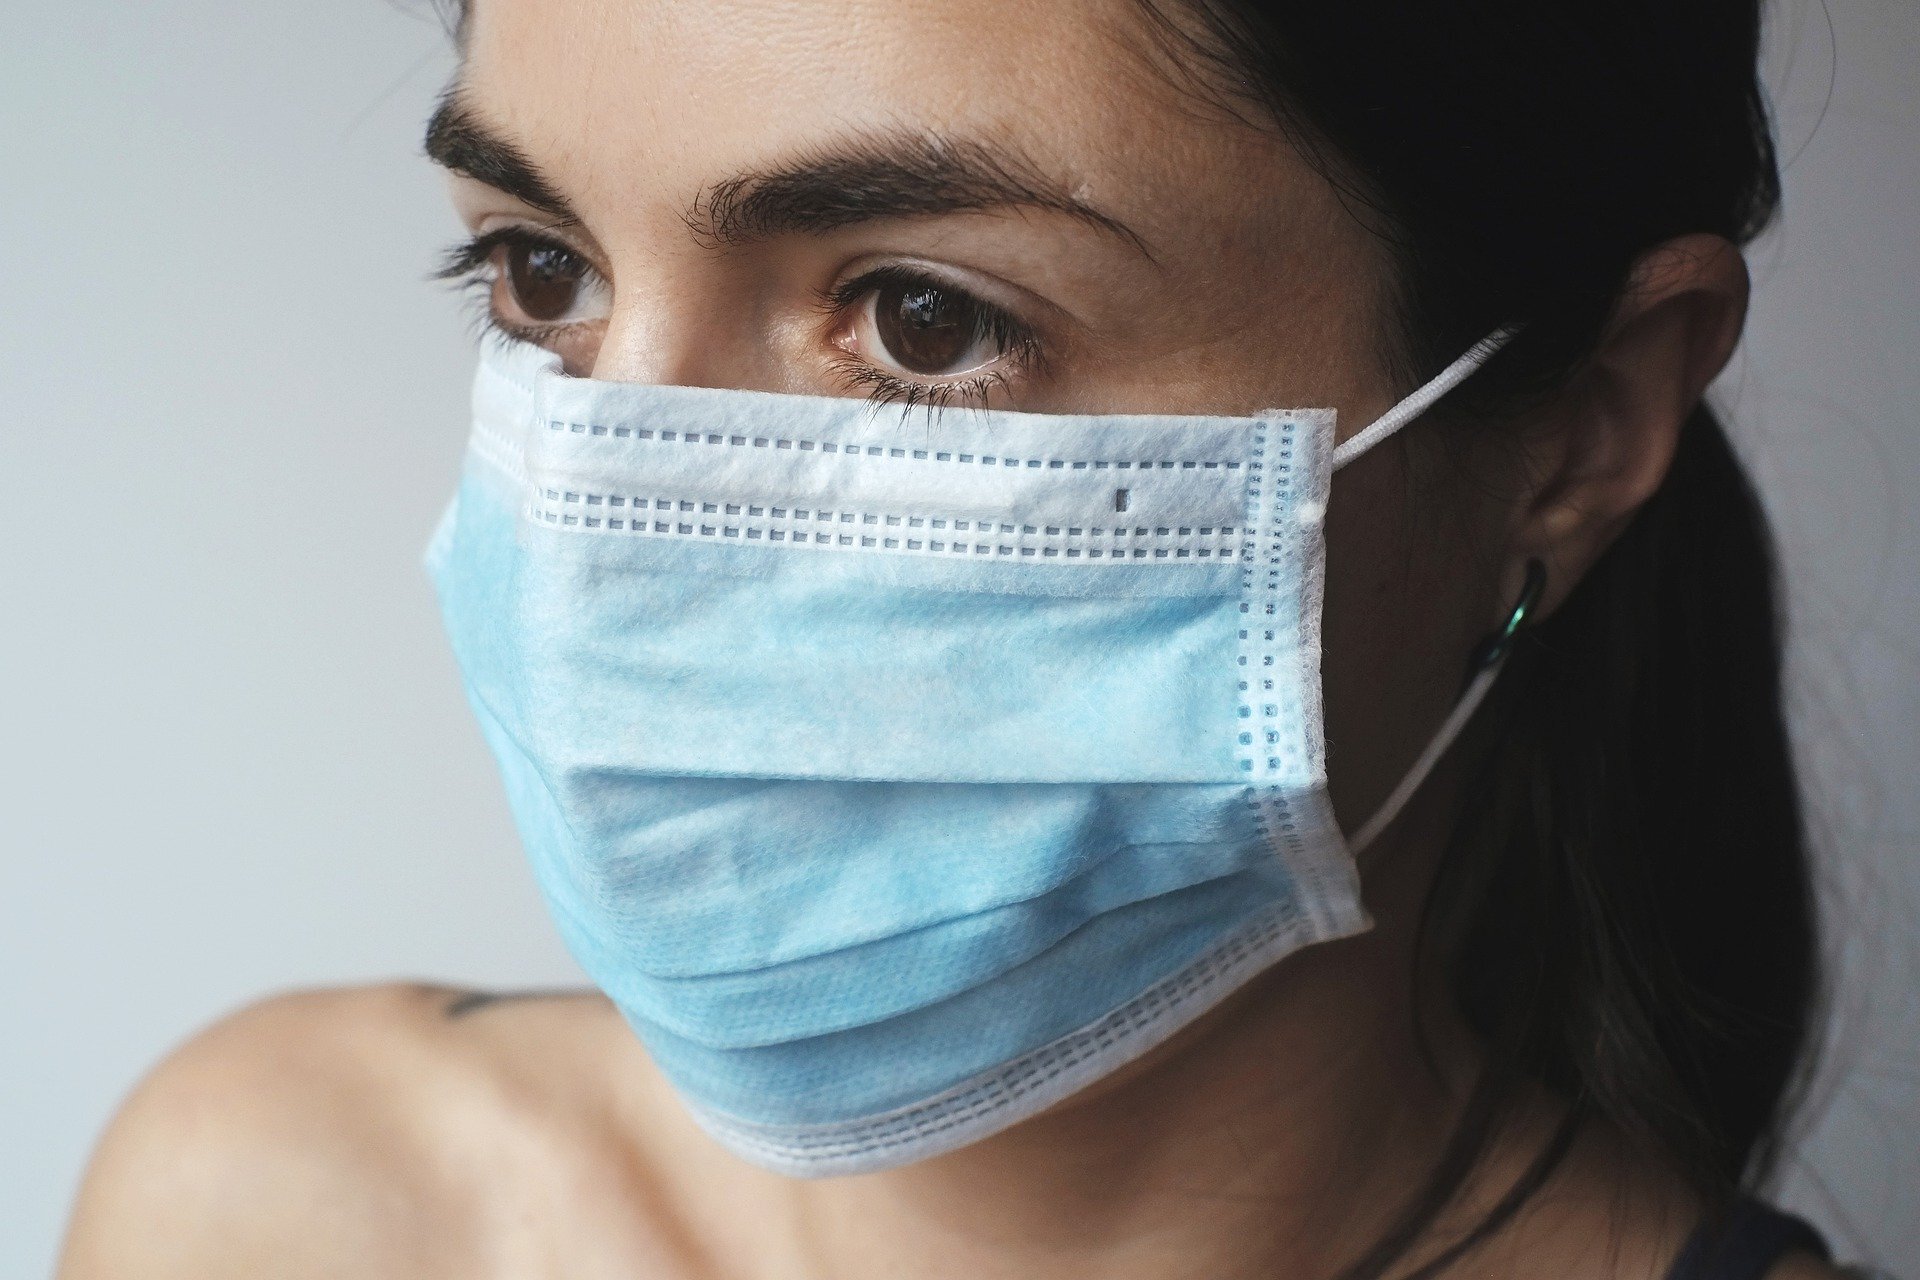 Does Wearing masks releases high levels of carbon dioxide?